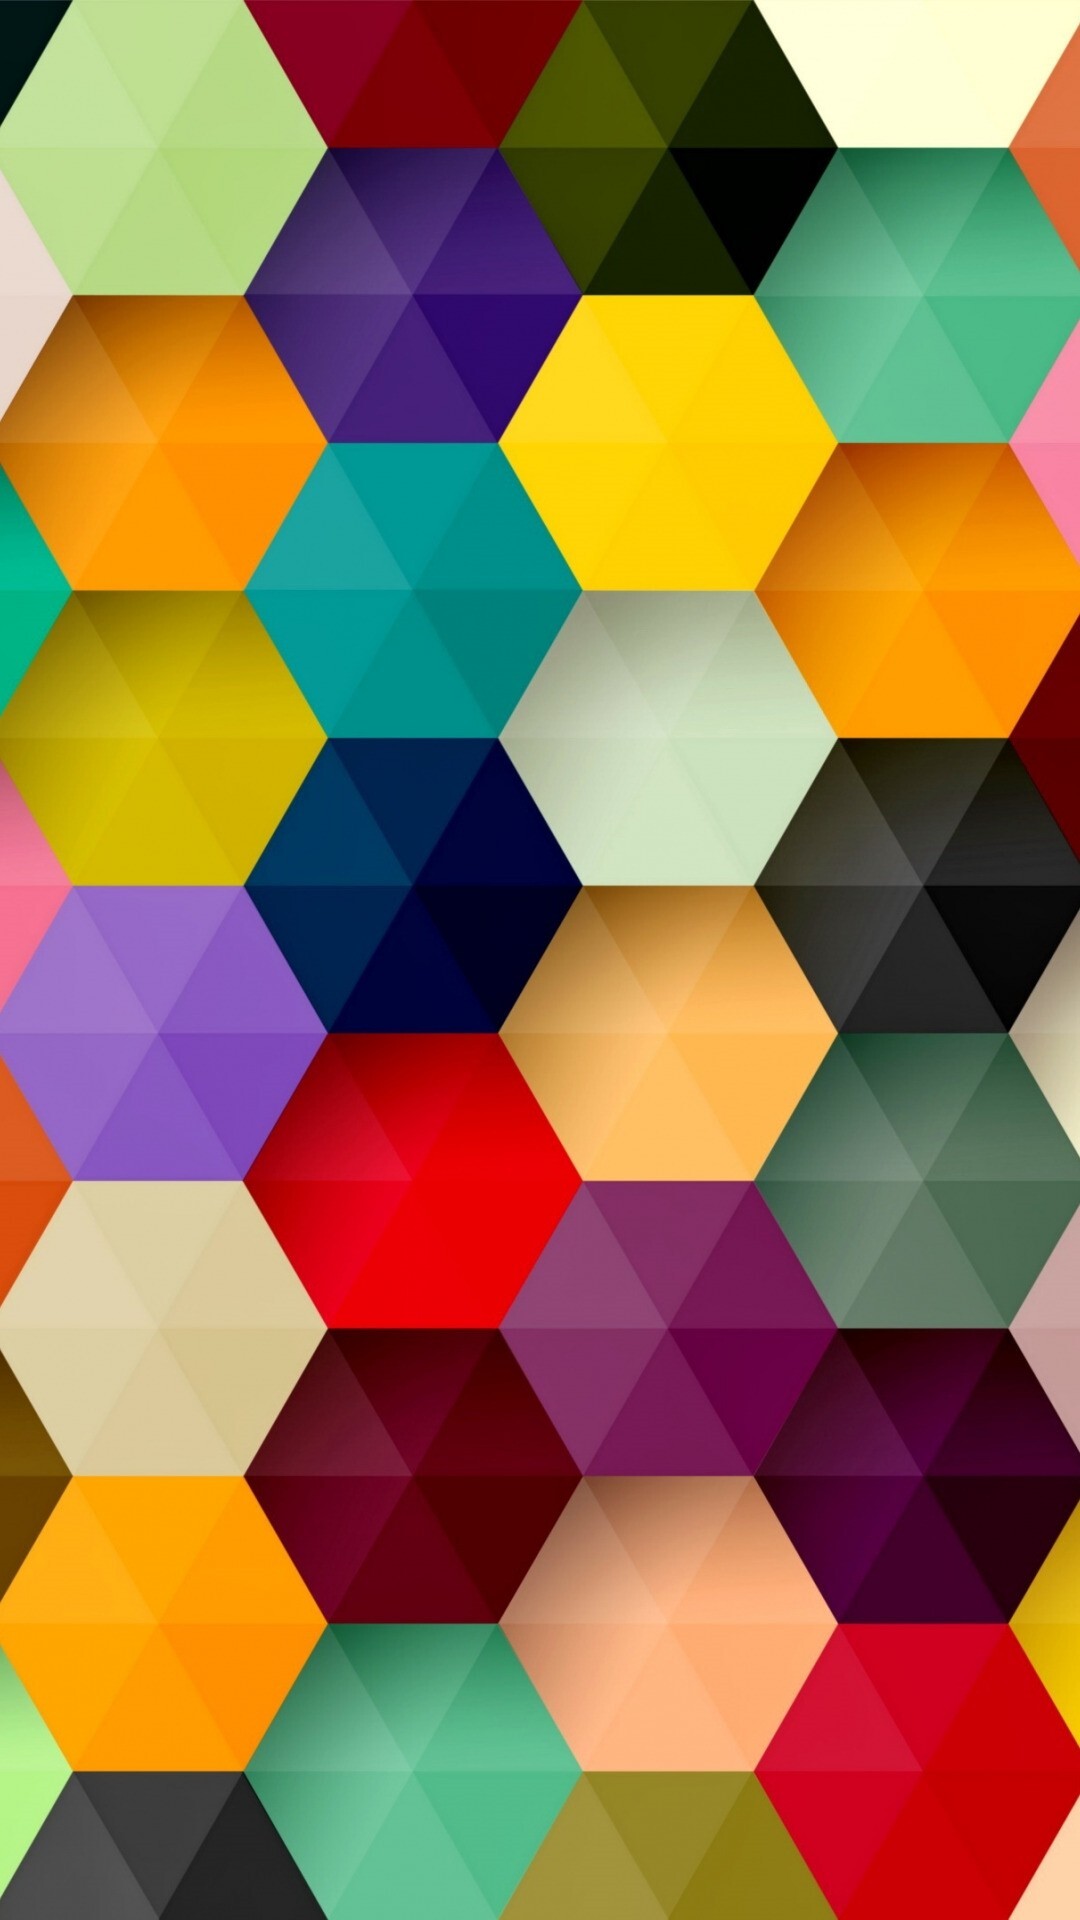 Geometry: Triangles, Hexagons, Multicolored figures, Supplementary angles. 1080x1920 Full HD Wallpaper.